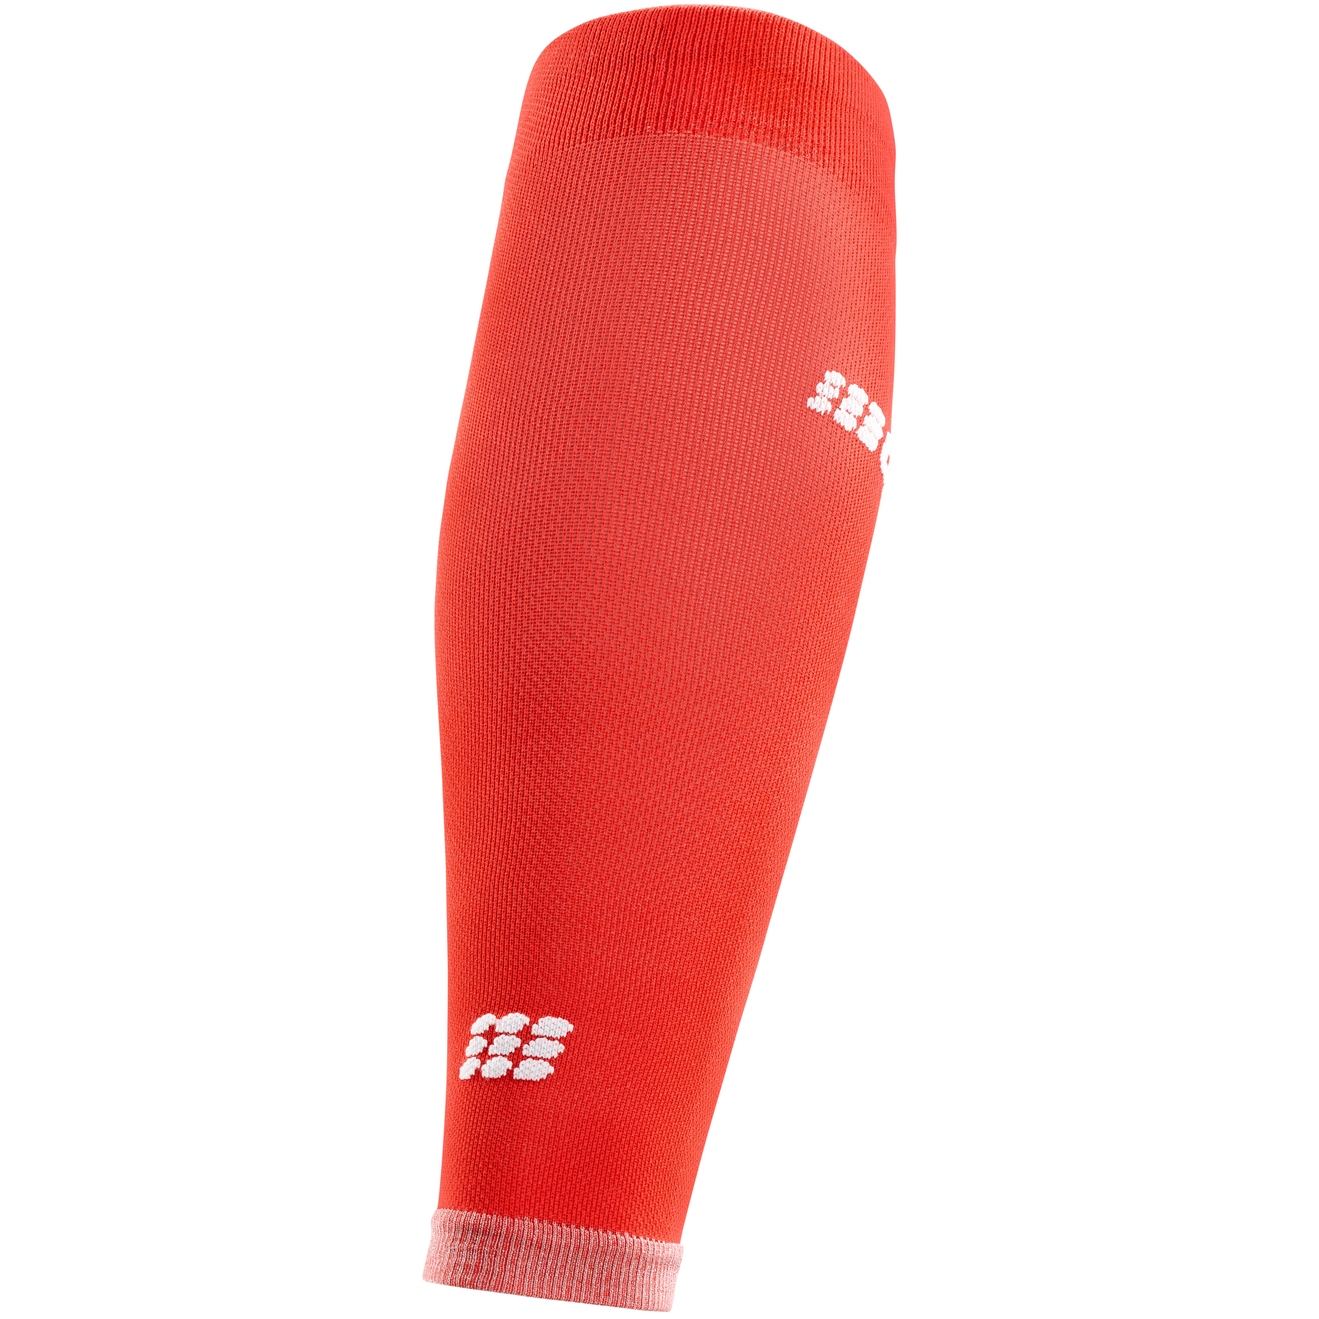 CEP Ultralight Compression Calf Sleeves, Men